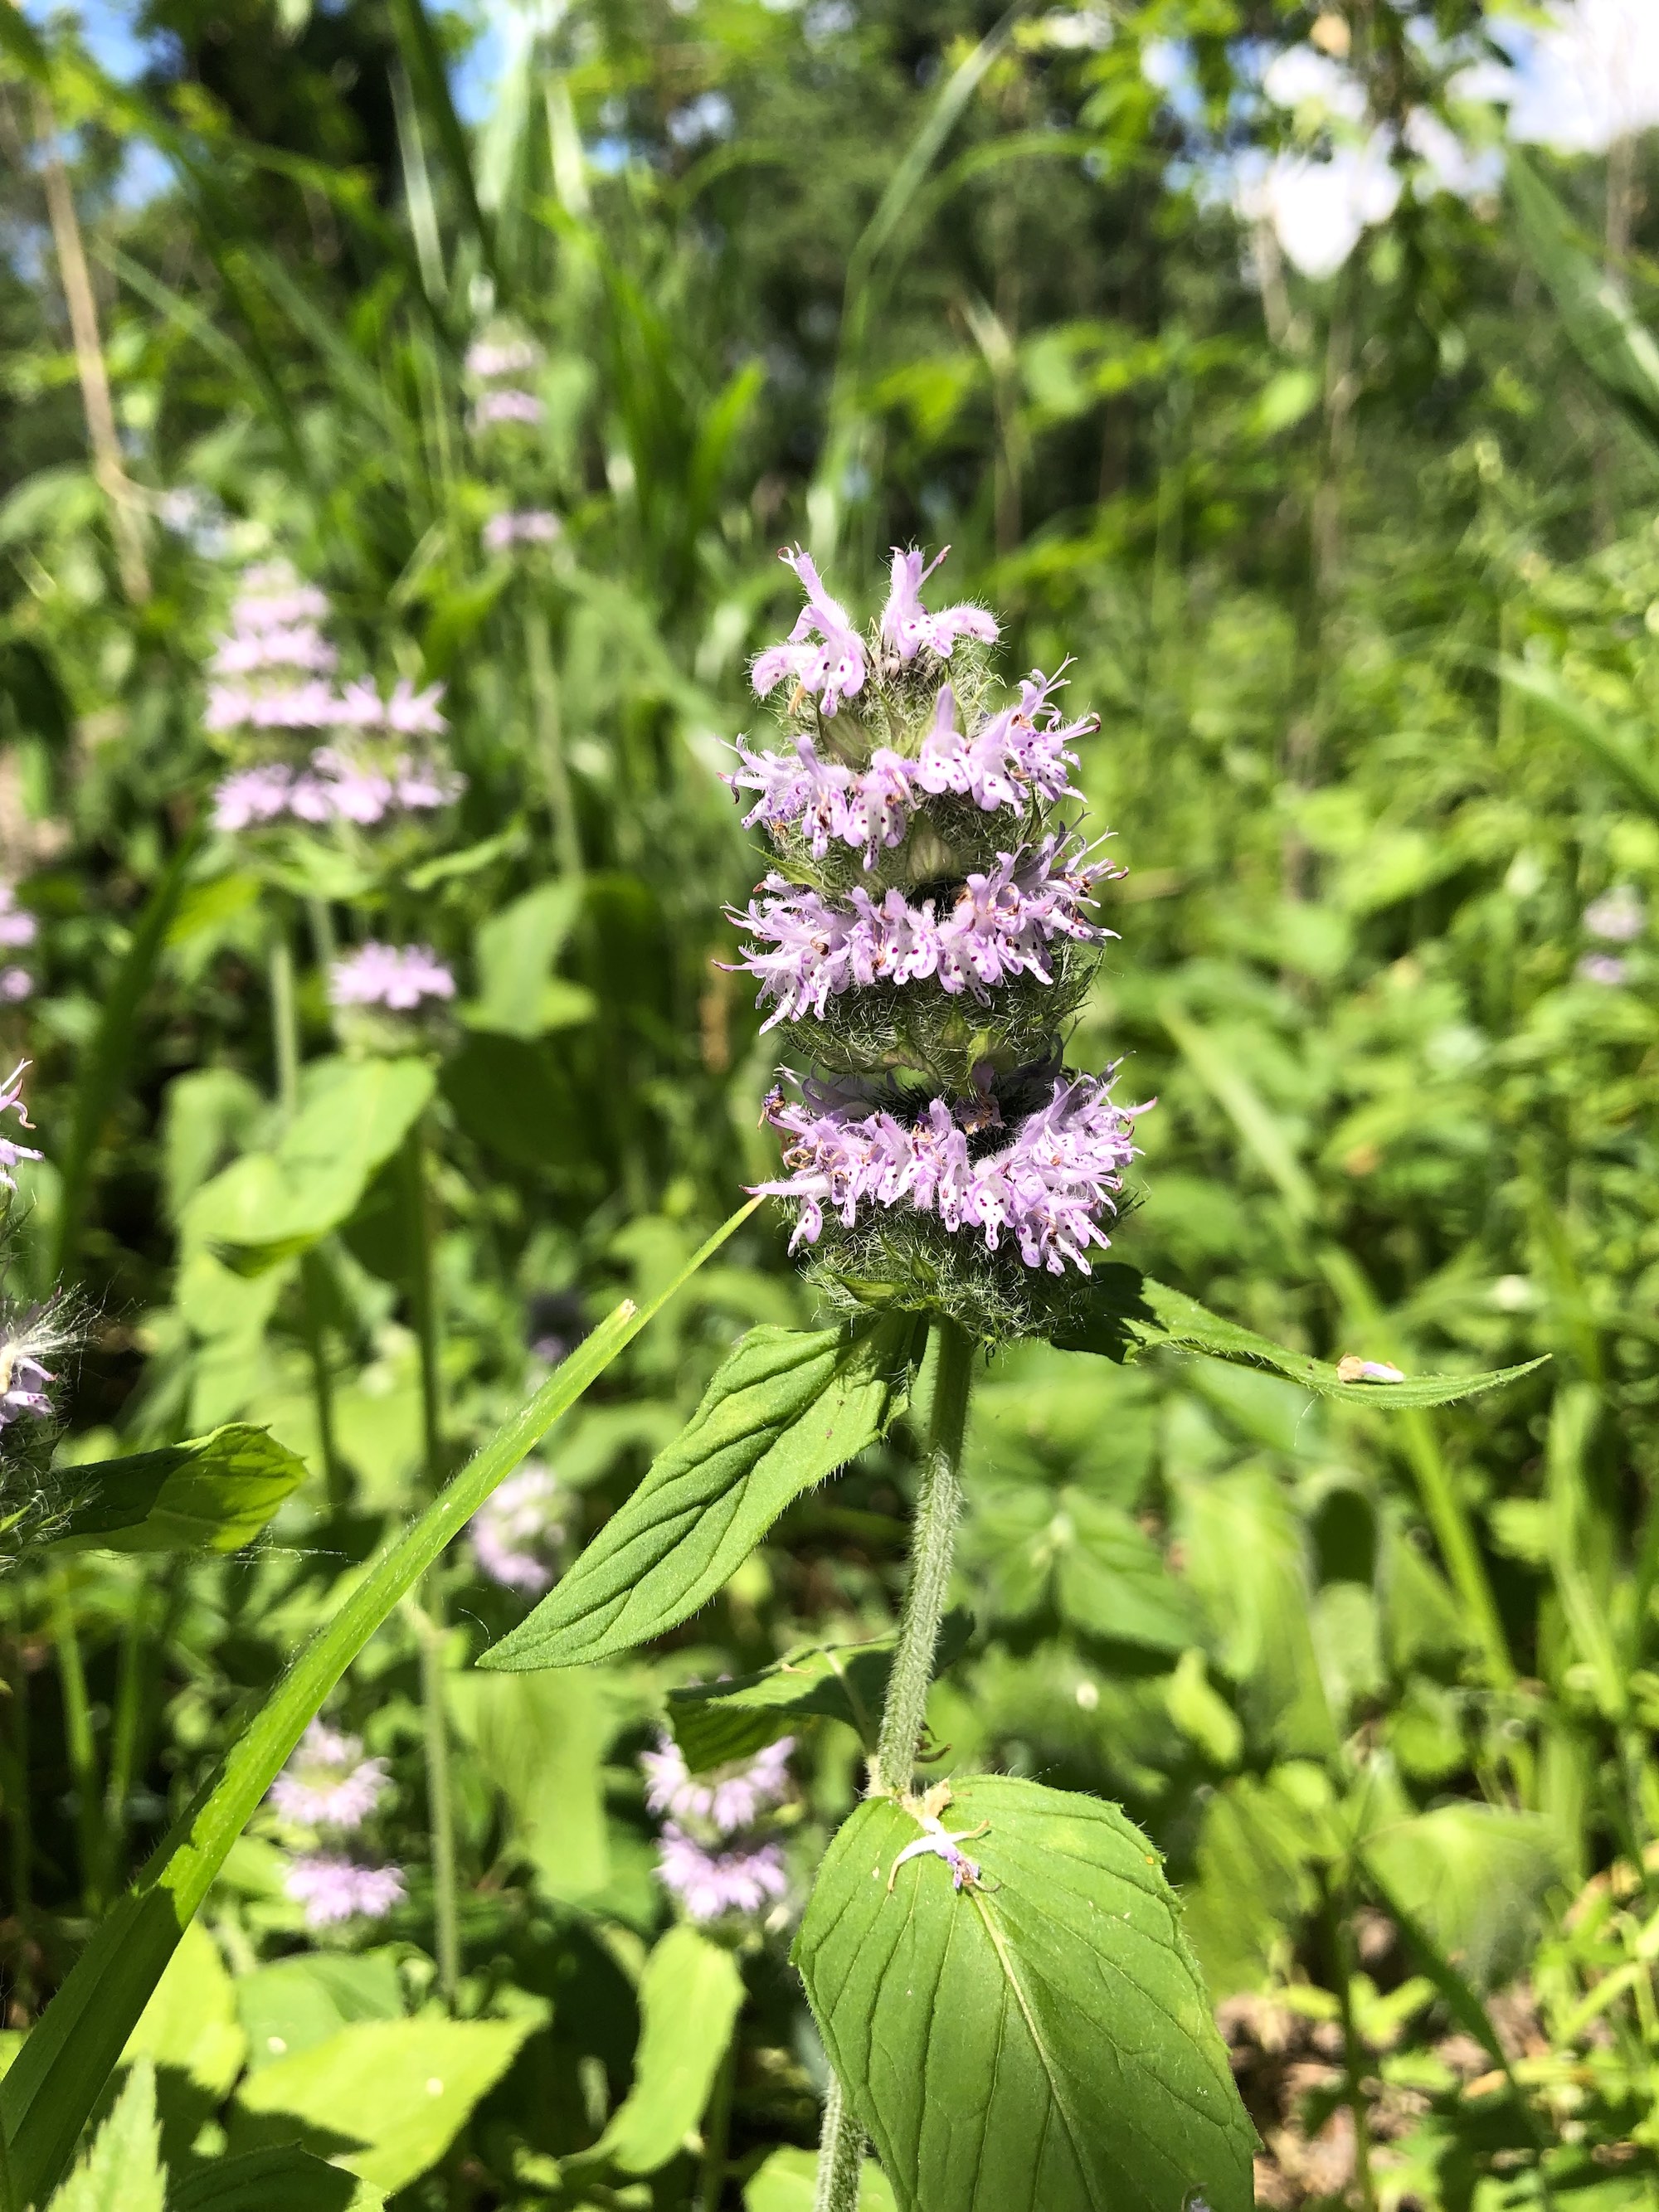 Downy Pagoda-plant in woods just behind Council Ring in the UW-Arboretum Oak Savanna in Madison, Wisconsin on June 8, 2021.